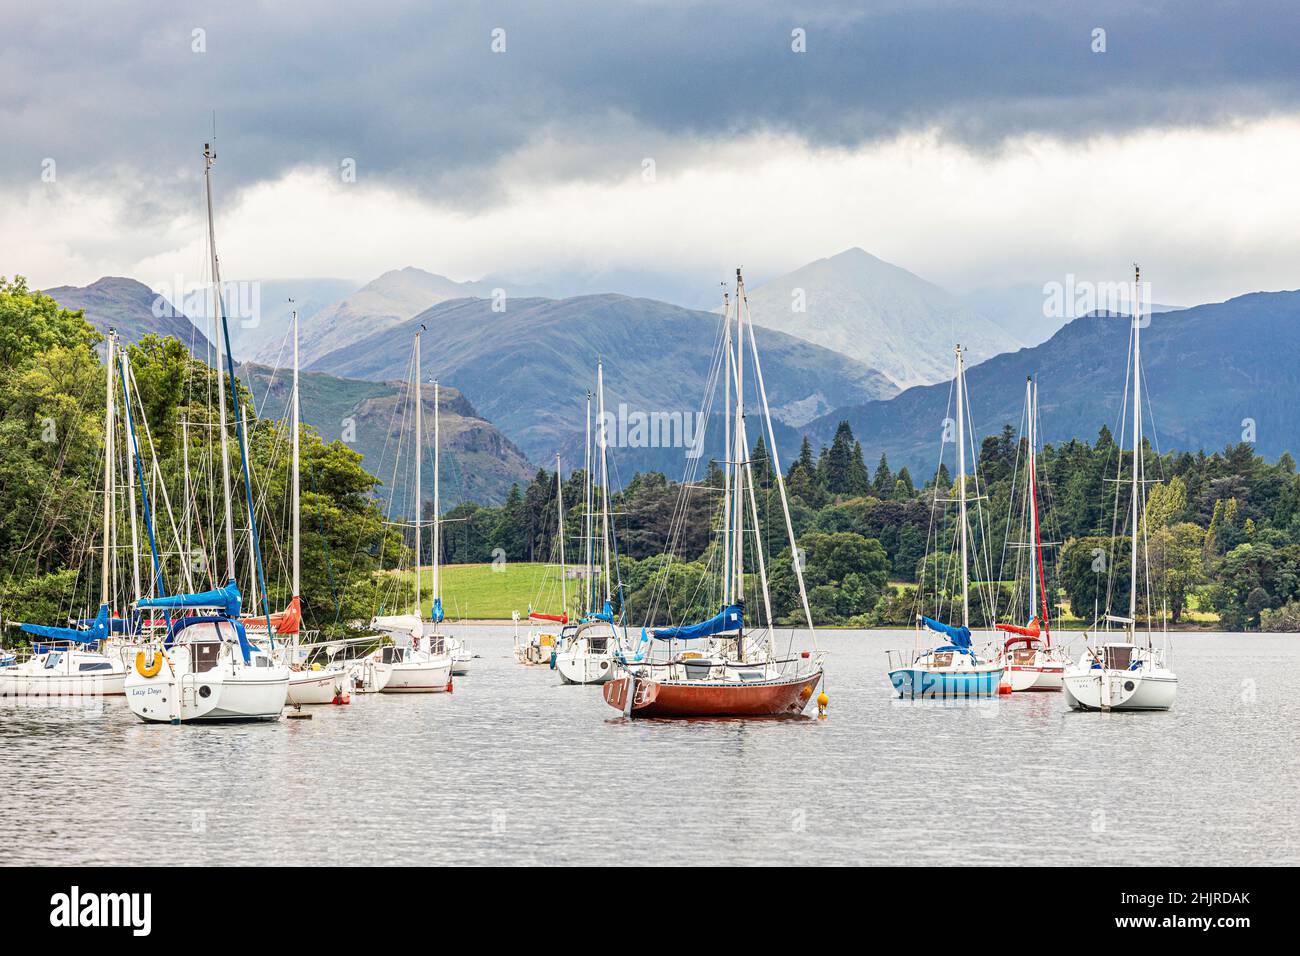 Yachts on Ullswater in the English Lake District looking towards Helvellyn under heavy cloud, Cumbria UK Stock Photo